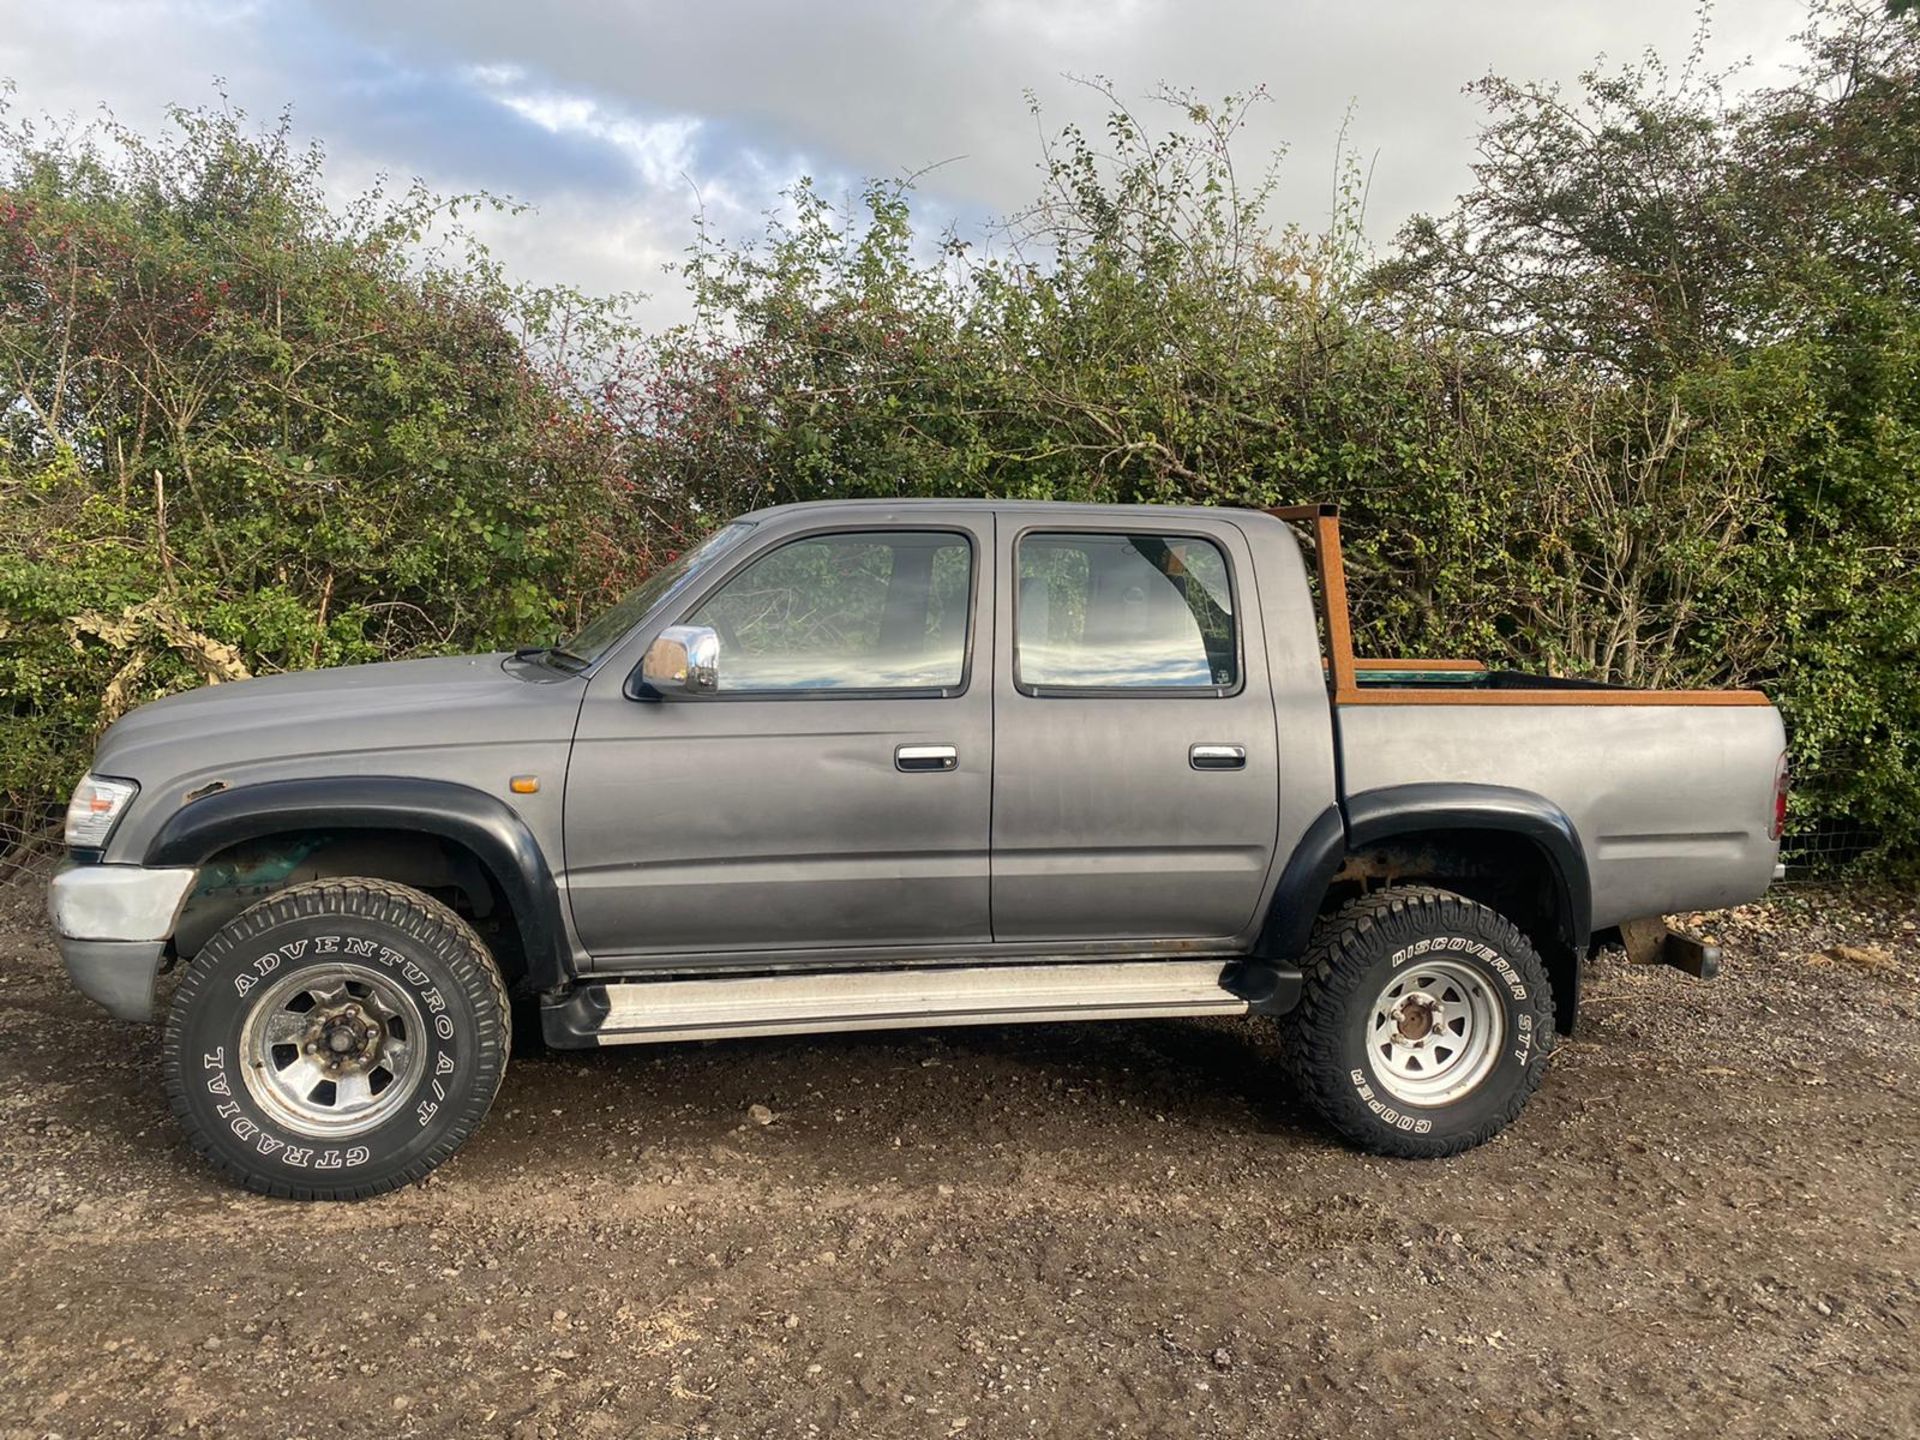 2004 TOYOTA HILUX 280VX 4X4 PICK UP.LOCATON NORTH YORKSHIRE. - Image 2 of 7